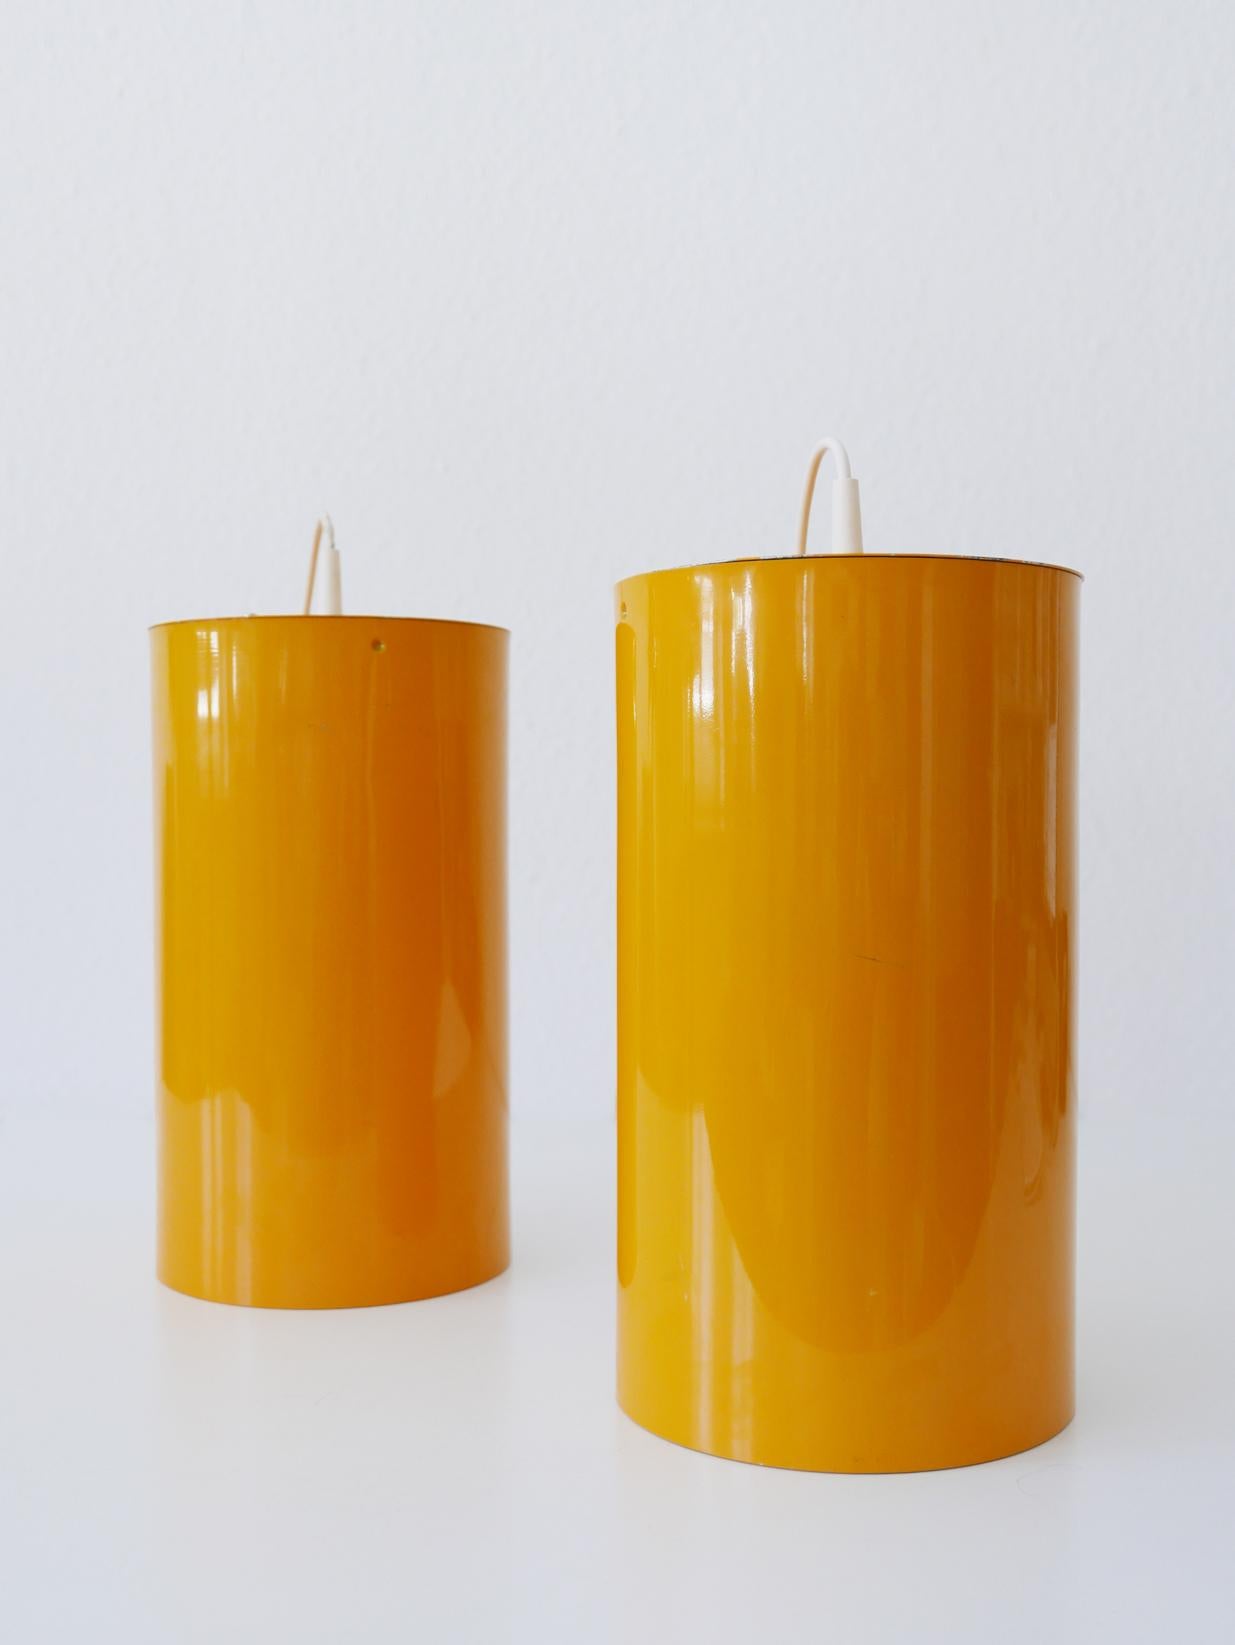 Set of Two Elegant Mid-Century Modern Pendant Lamps by Erco, 1970s, Germany For Sale 4